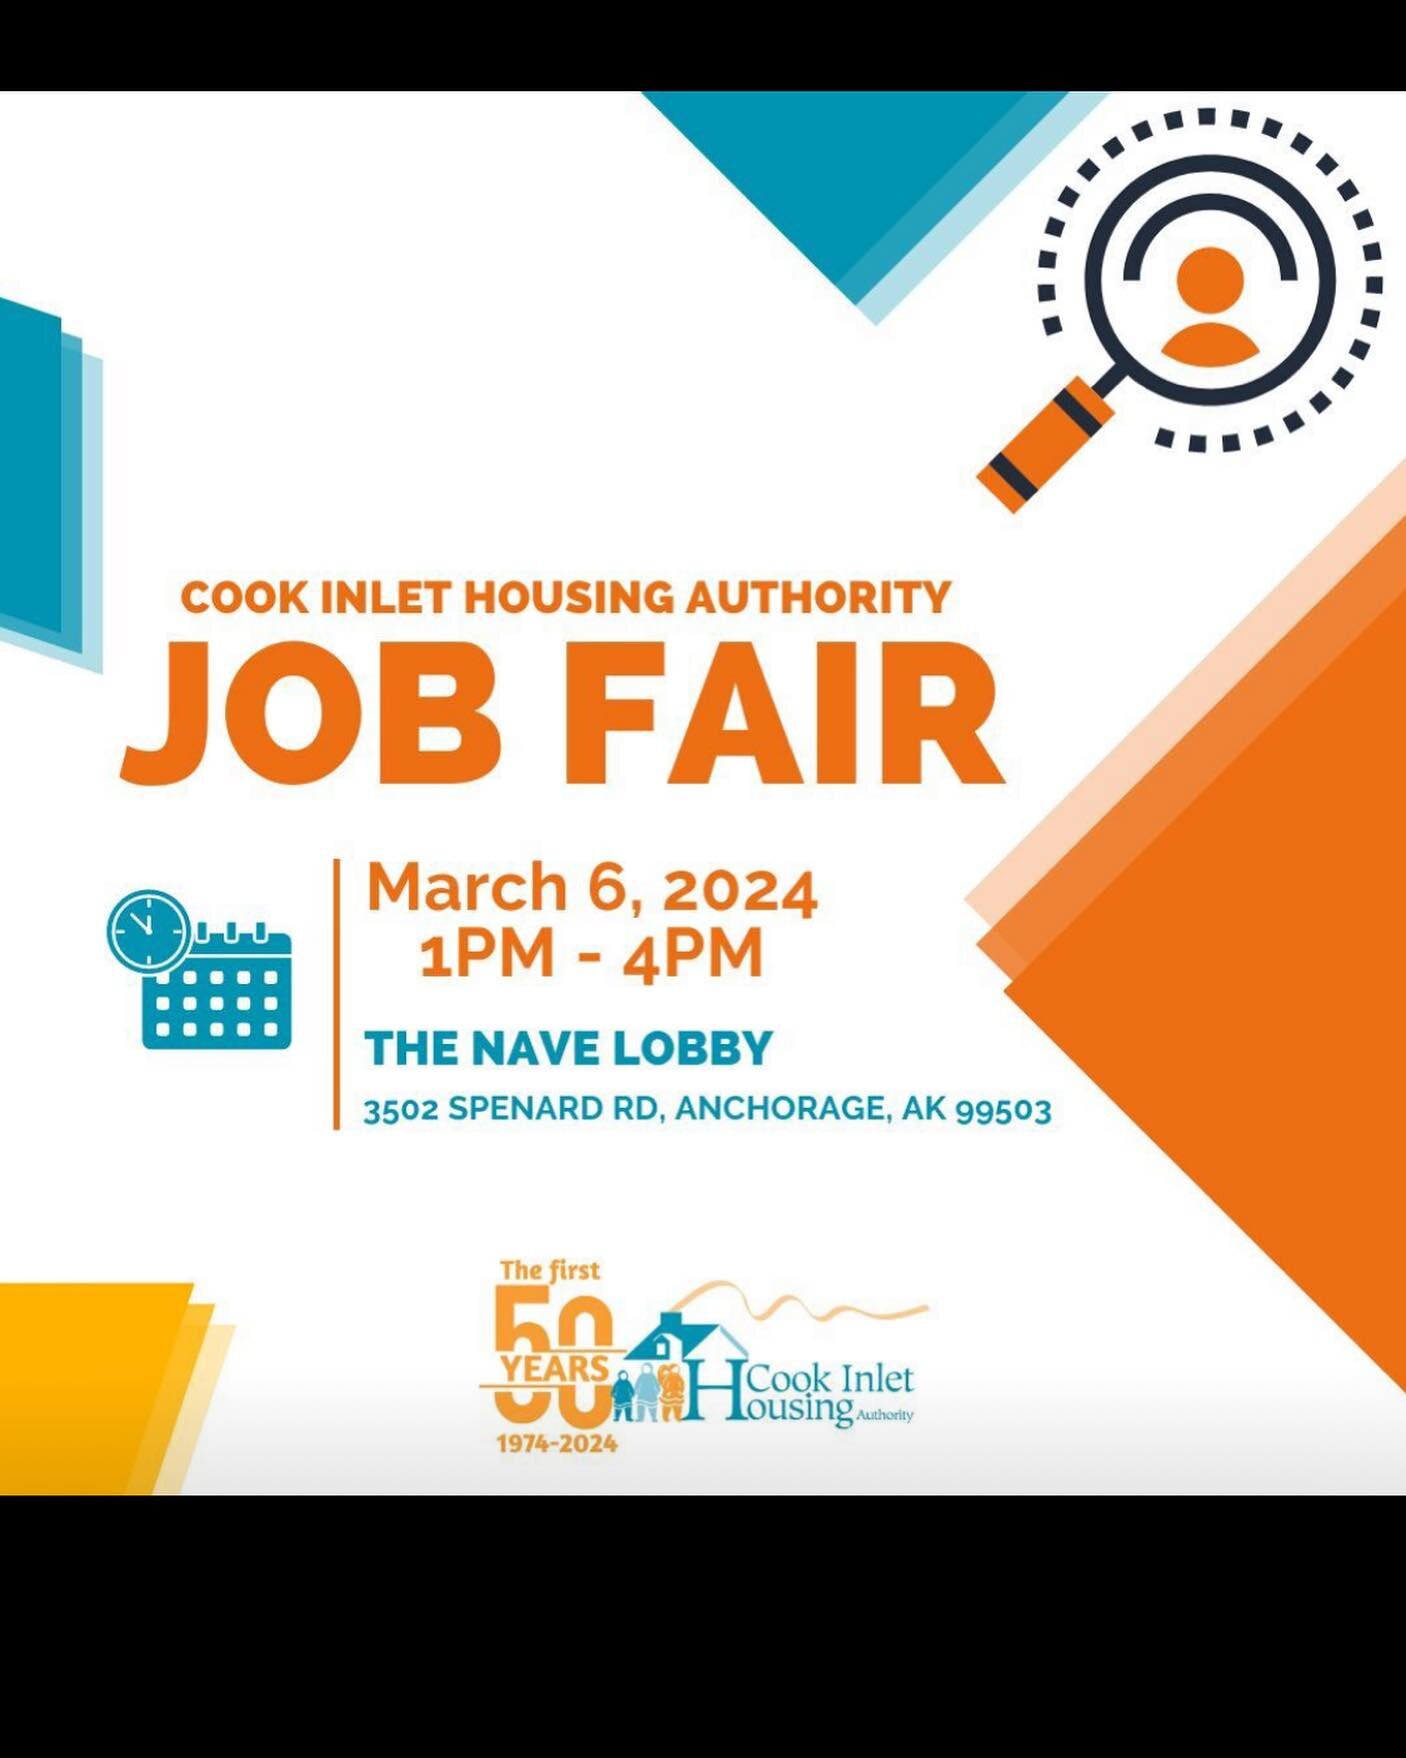 COOK INLET HOUSING AUTHORITY is having a JOB FAIR March 6th, 2024 from 1pm - 4pm at The Nave 3502 Spenard Road, Anchorage, AK 99503! 

Come prepared! Bring your resume, dress for success and speak with hiring managers for select positions. 

Here are